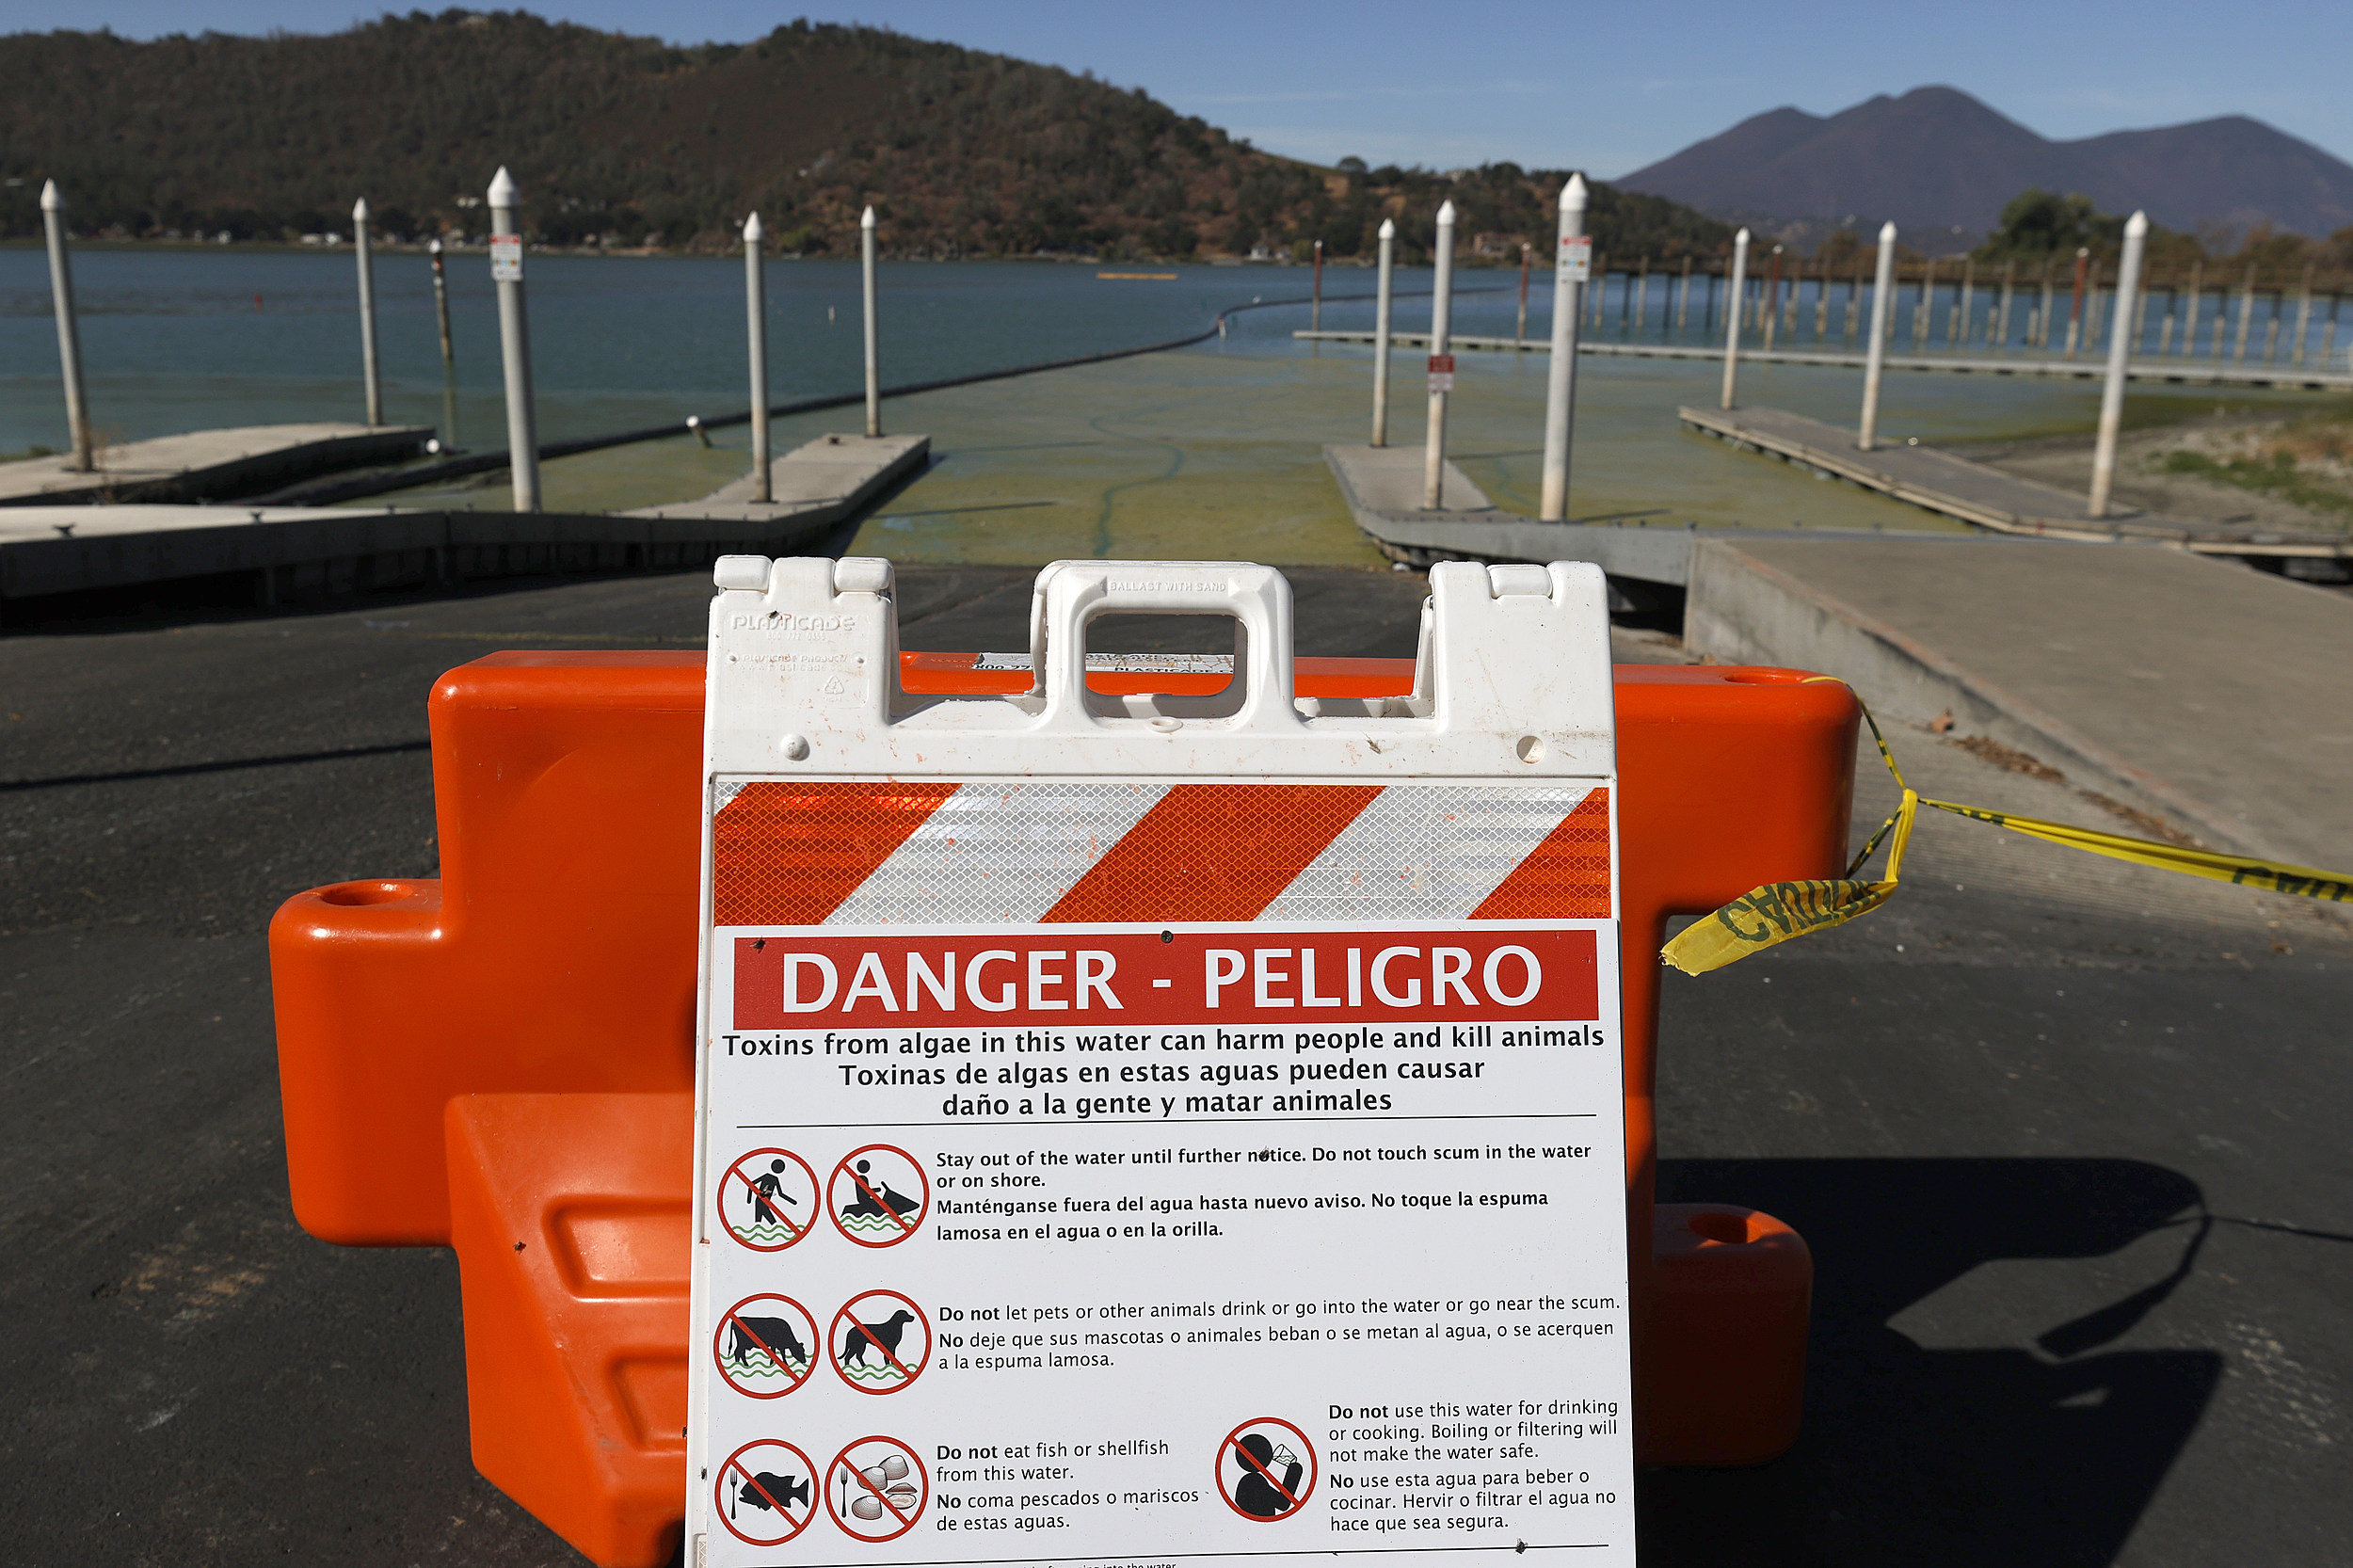 Cyanotoxin Outbreak Due To Dry, Hot Summer Threatens Water Supply In Clear Lake, California